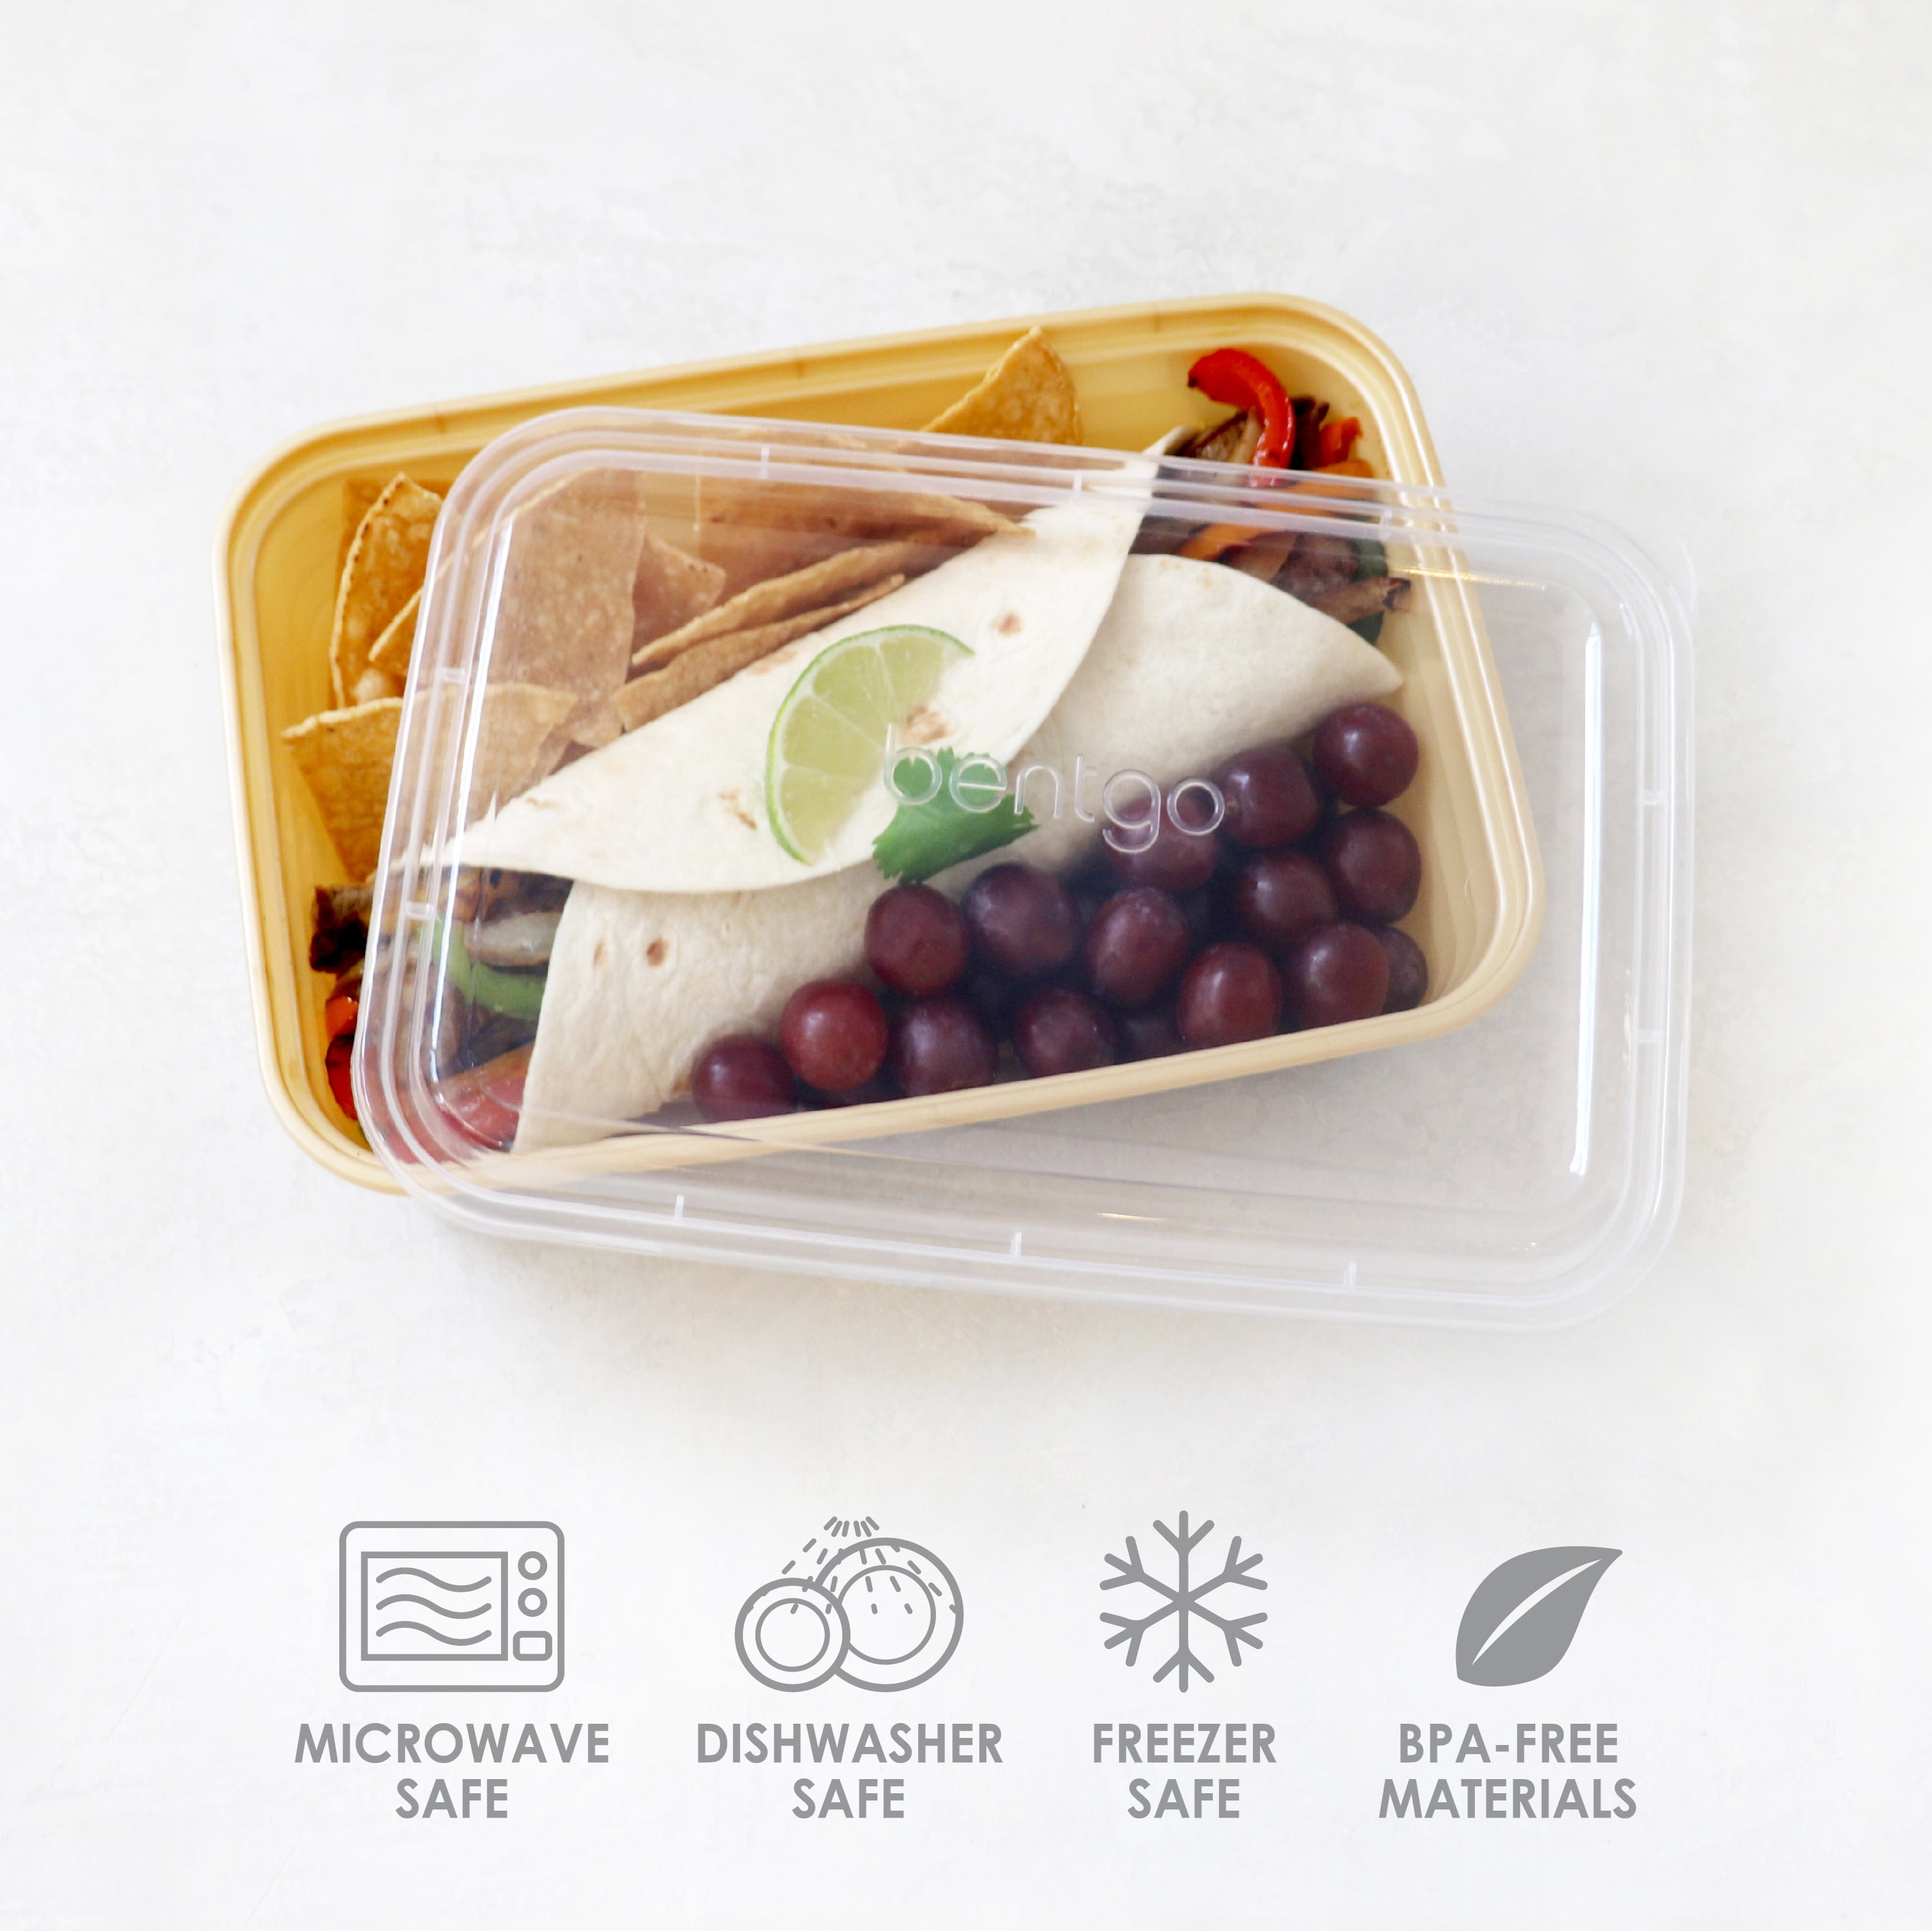  Bentgo® Prep 1-Compartment Containers - 20-Piece Meal Prep Kit:  10 Trays & 10 Lids - Lightweight, Durable, & Reusable BPA-Free To-Go Food  Containers; Microwave/Freezer/Dishwasher Safe (Gold): Home & Kitchen